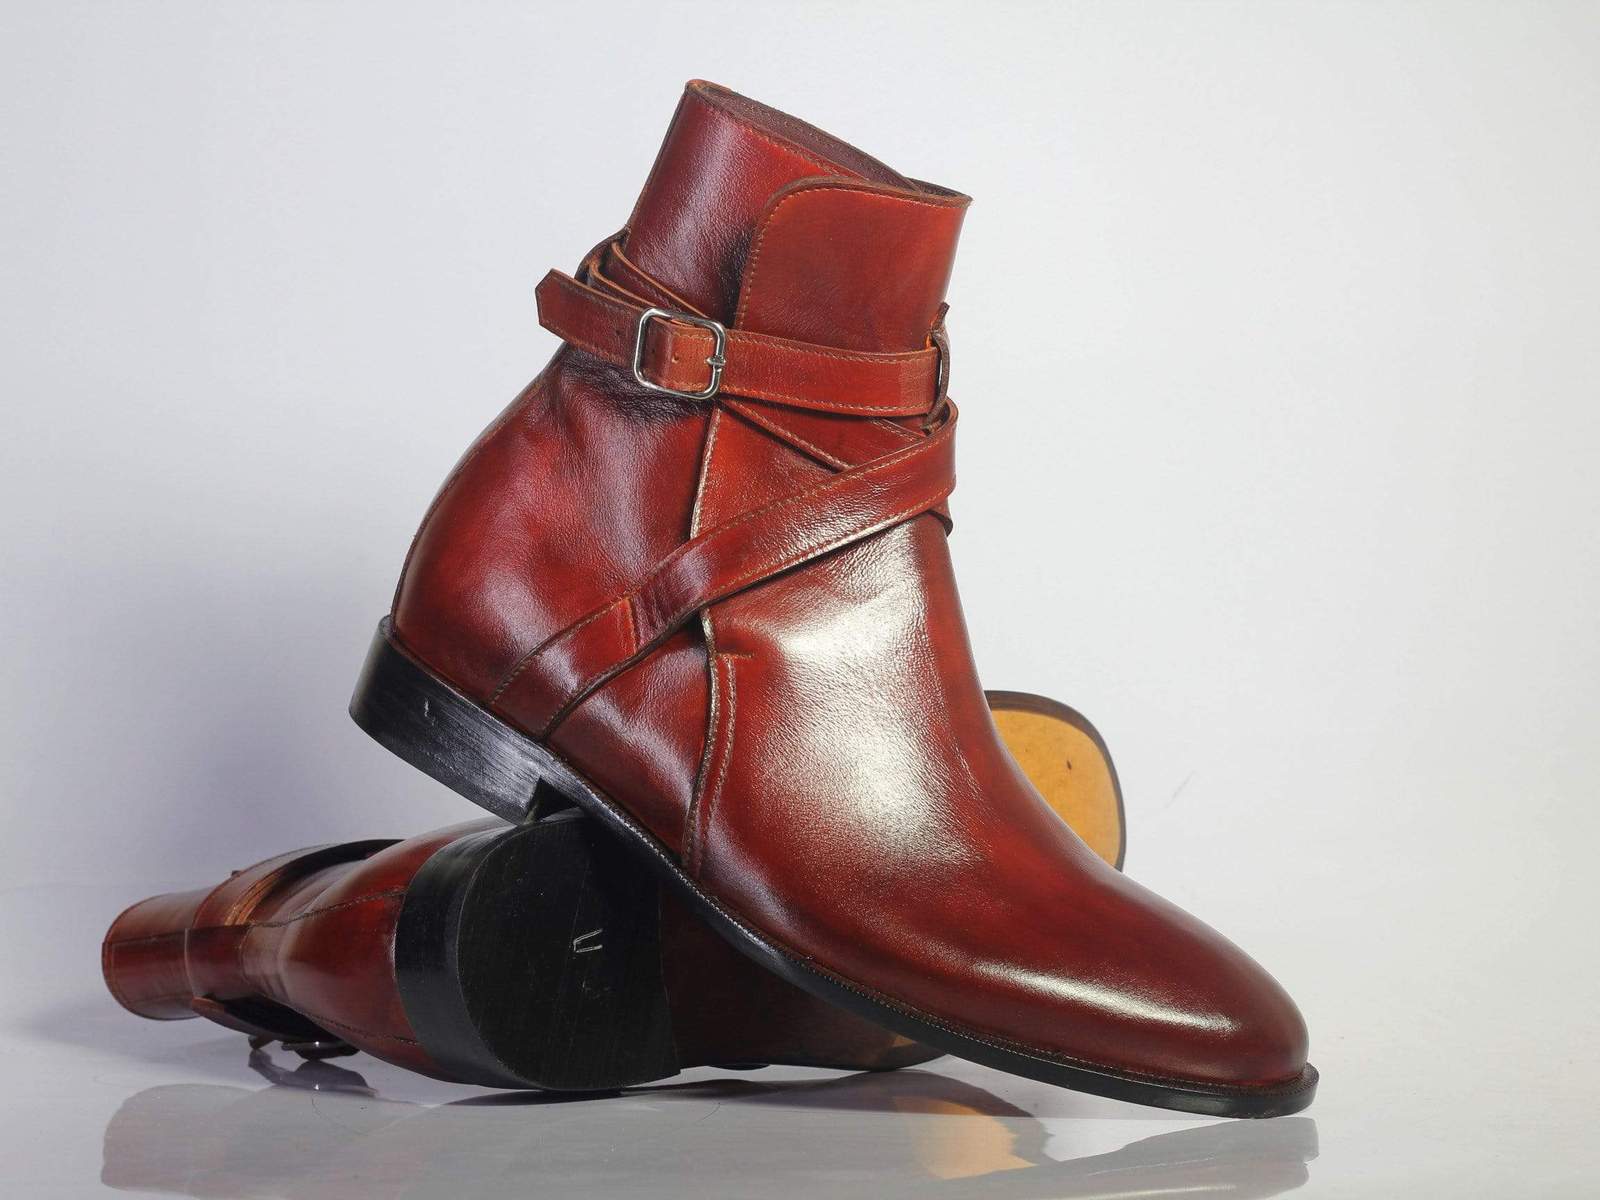 Bespoke Burgundy Leather Ankle Jodhpurs Boots For Men's - Boots